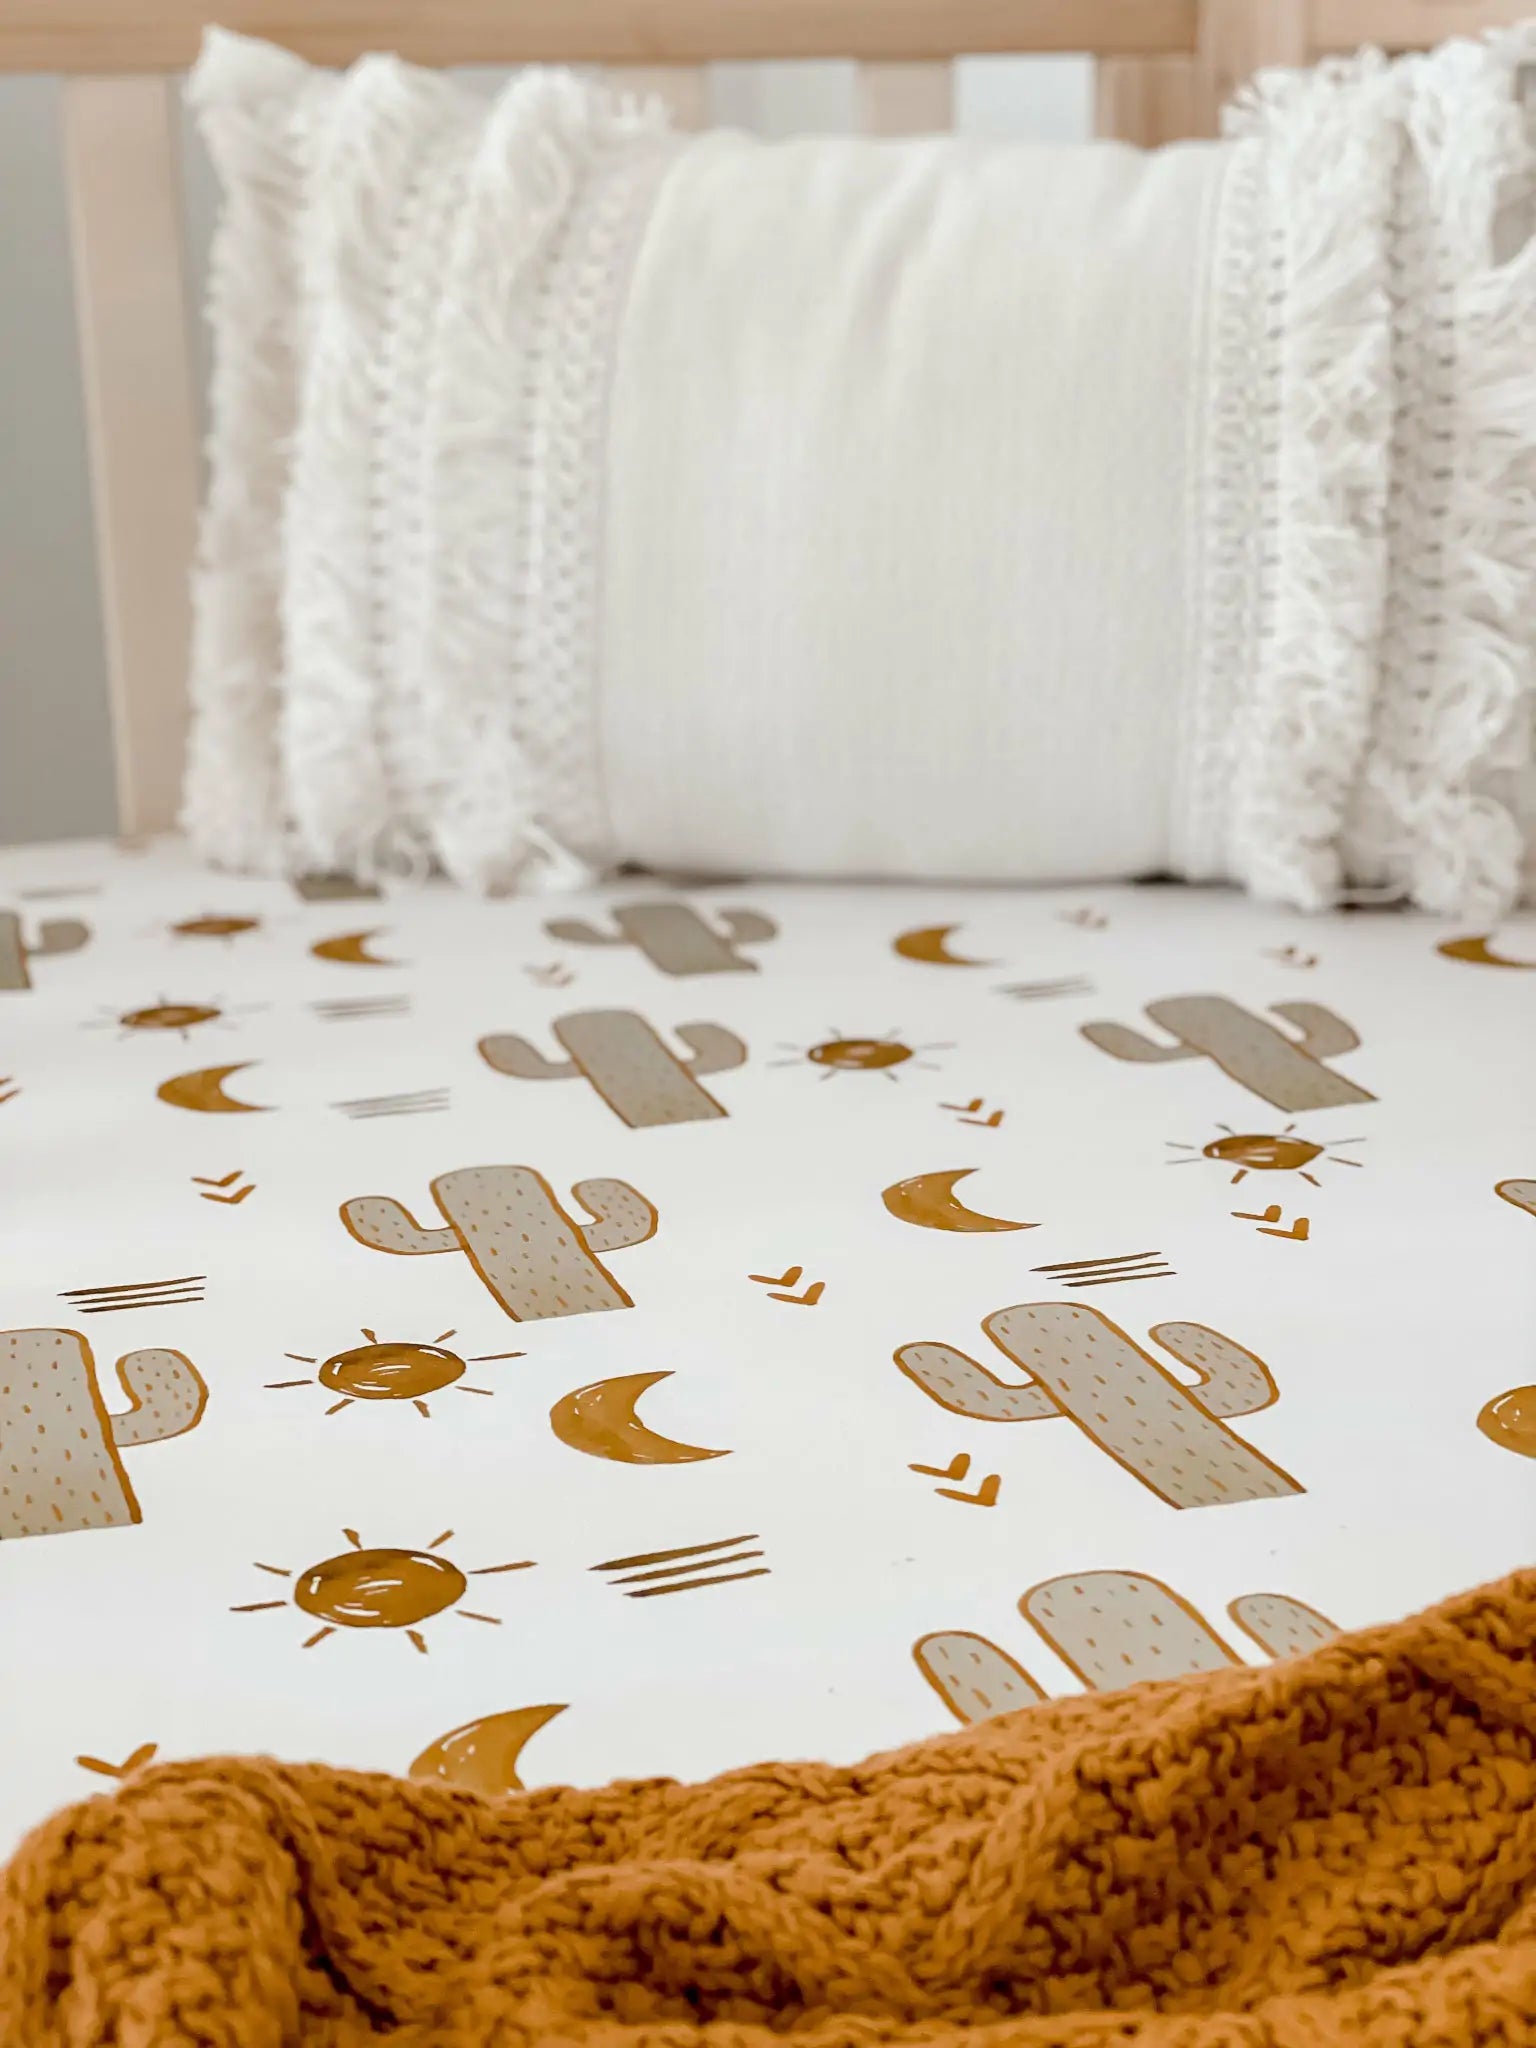 Great simple pattern to fit in any designer nursery, Brown cactus, suns on a white background.